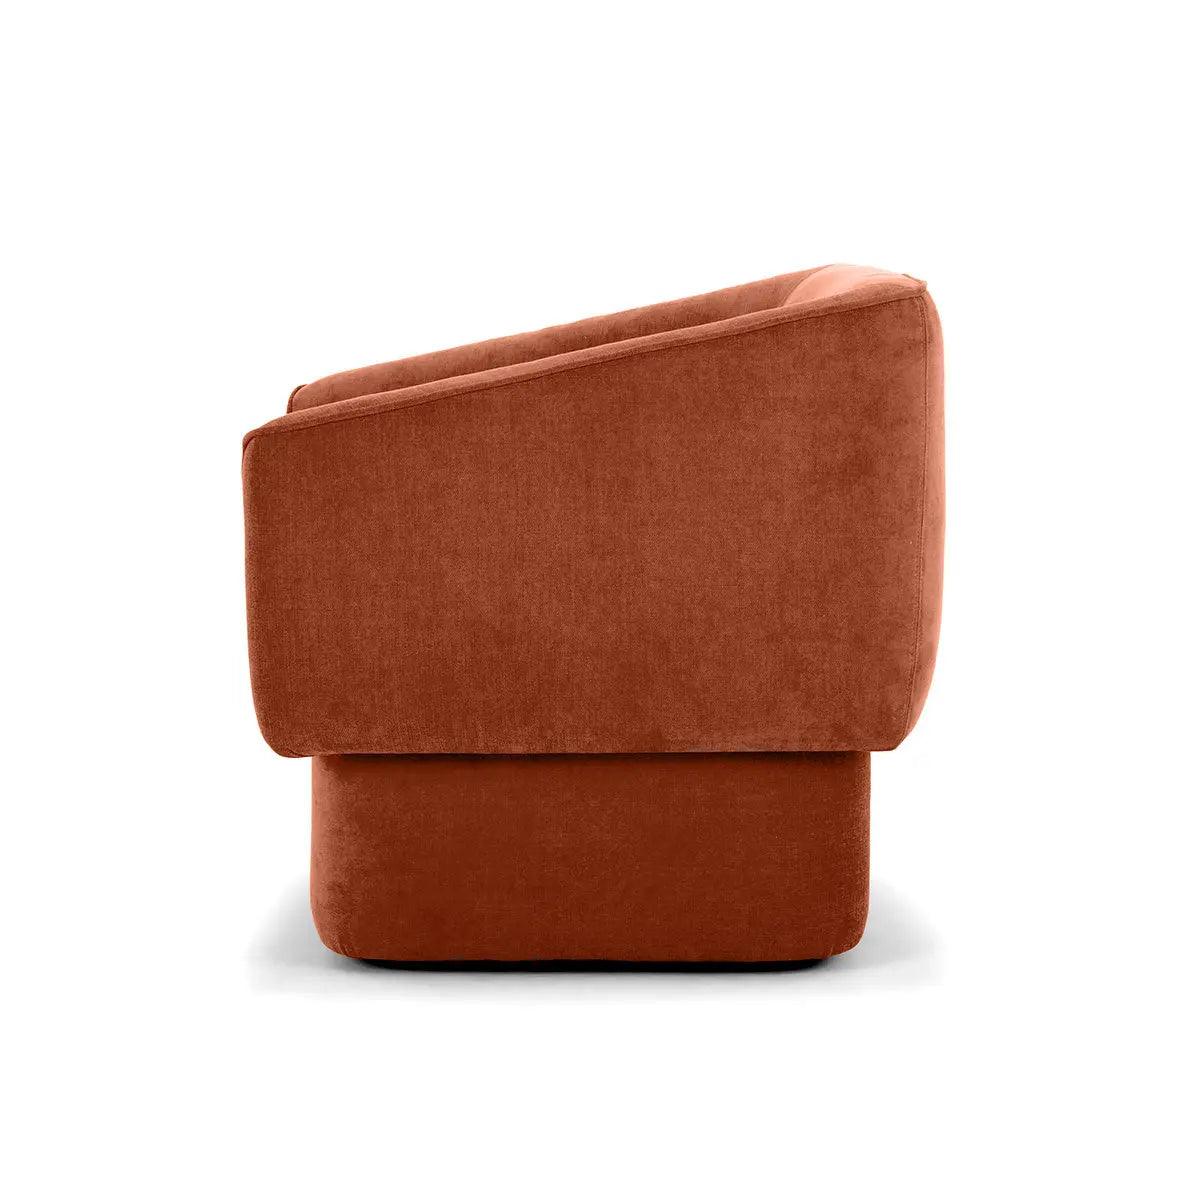 Marmont Swivel Arm Chair - Rust The Family Love Tree